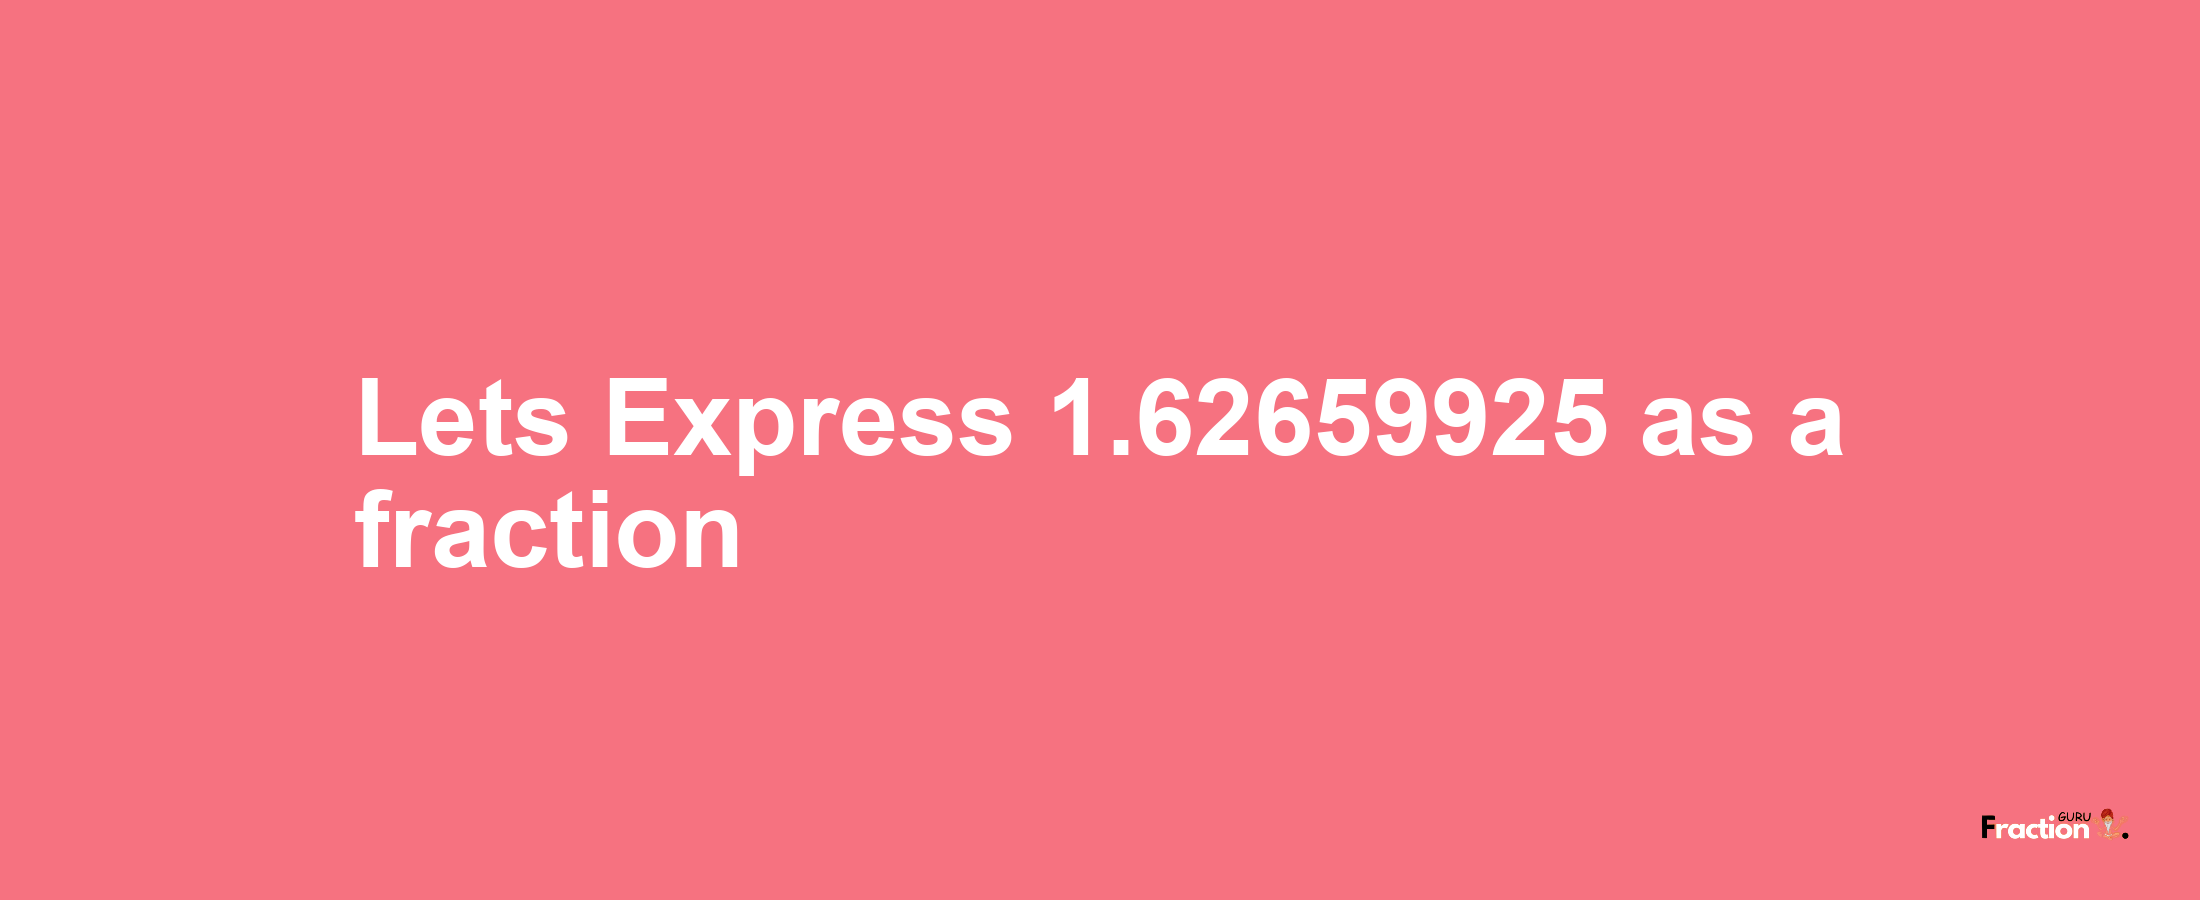 Lets Express 1.62659925 as afraction